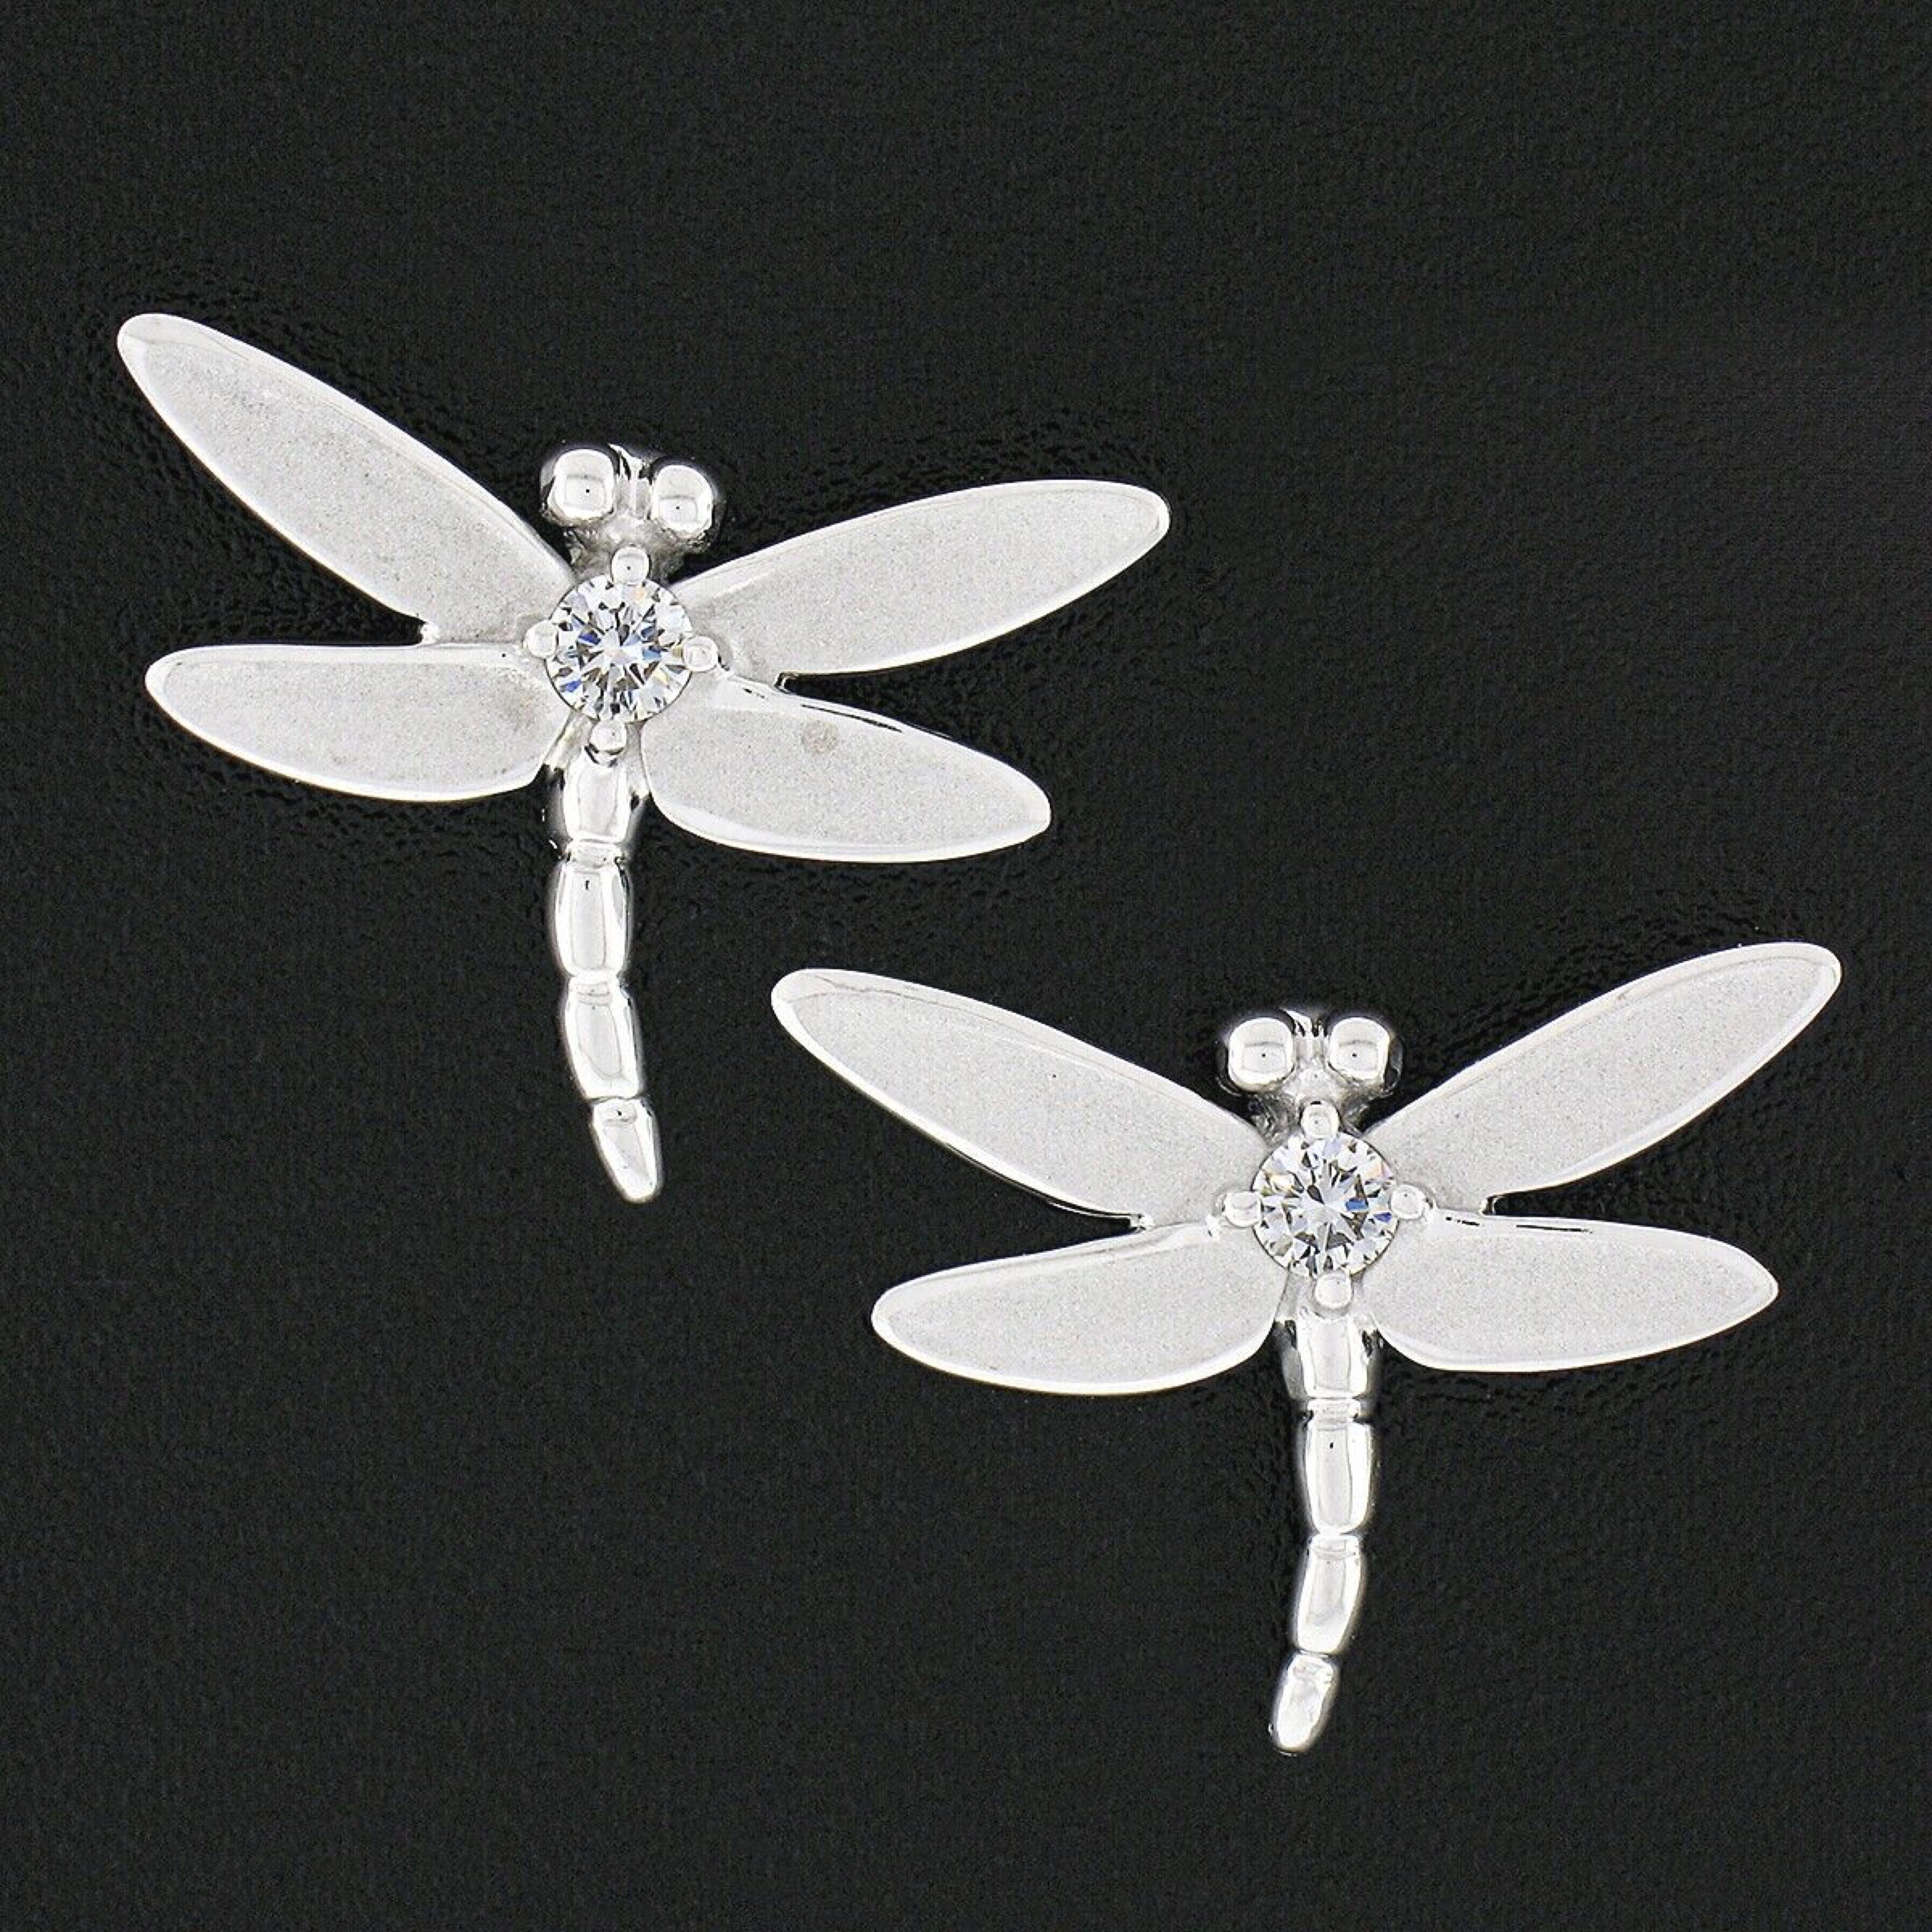 This rare and very lovely pair of Tiffany & Co. earrings was crafted in solid 18k white gold and feature two very well crafted and detailed dragonflies with a very fine quality round brilliant cut diamond at their center. The diamonds total